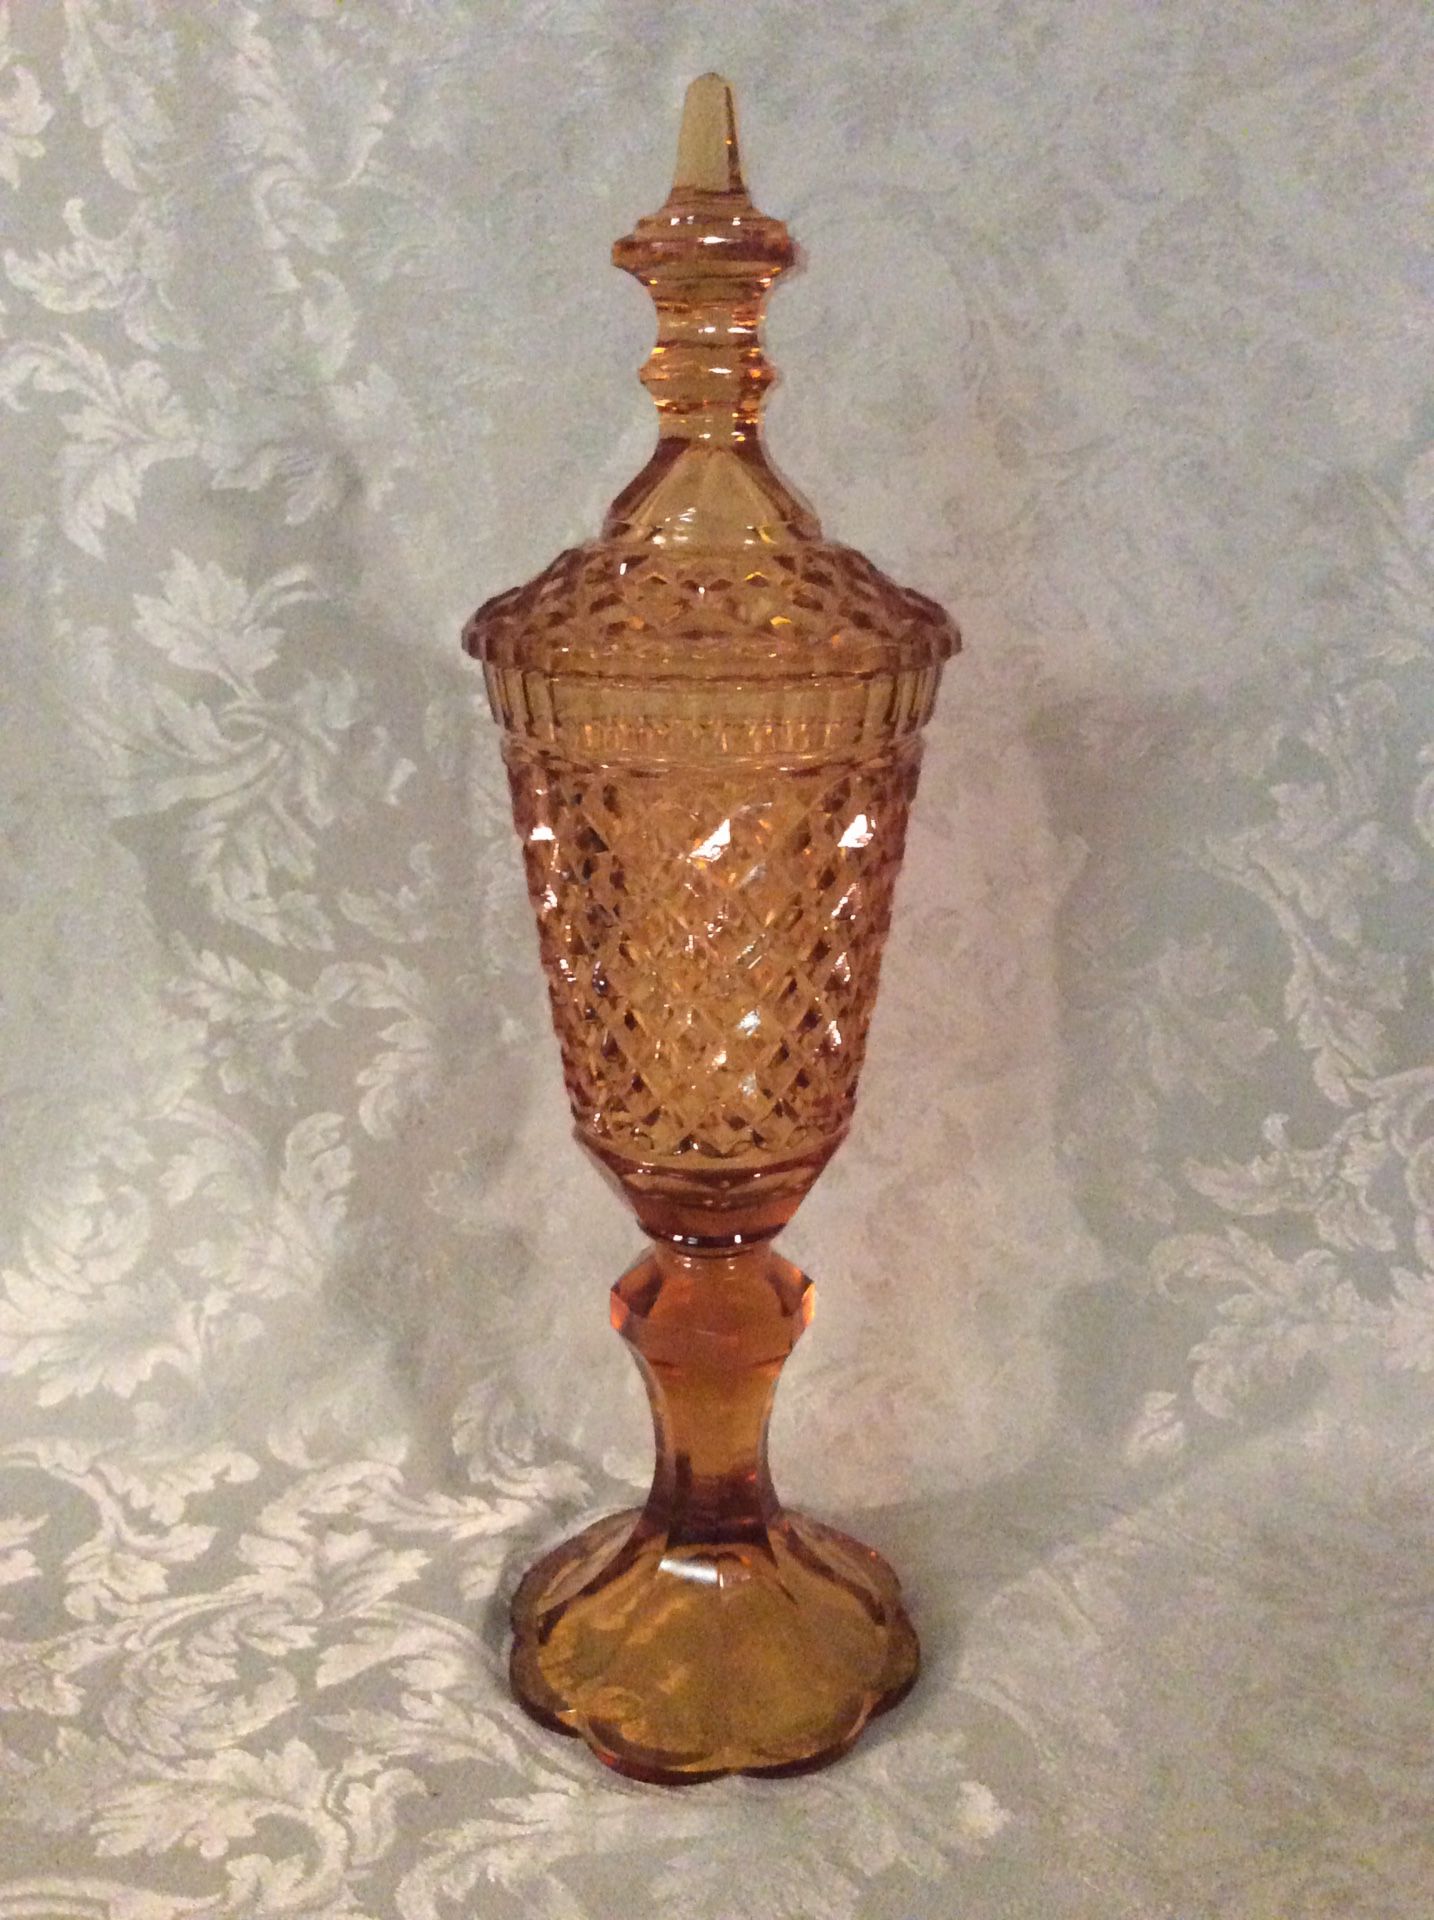 Lovely Amber-Colored Glass Candy Dish